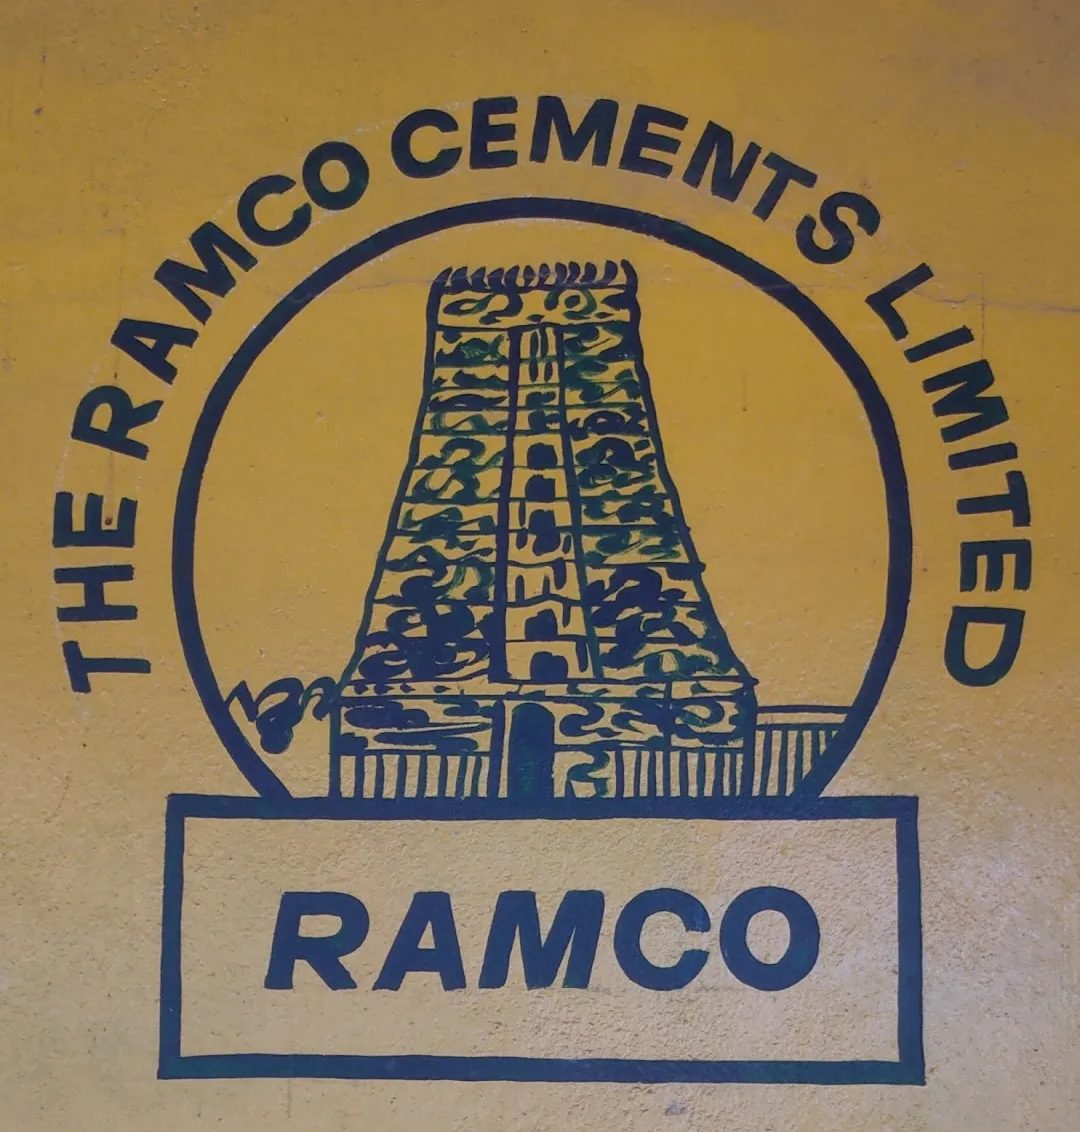 RAMCO CEMENT | Cement, Portland cement, Company types